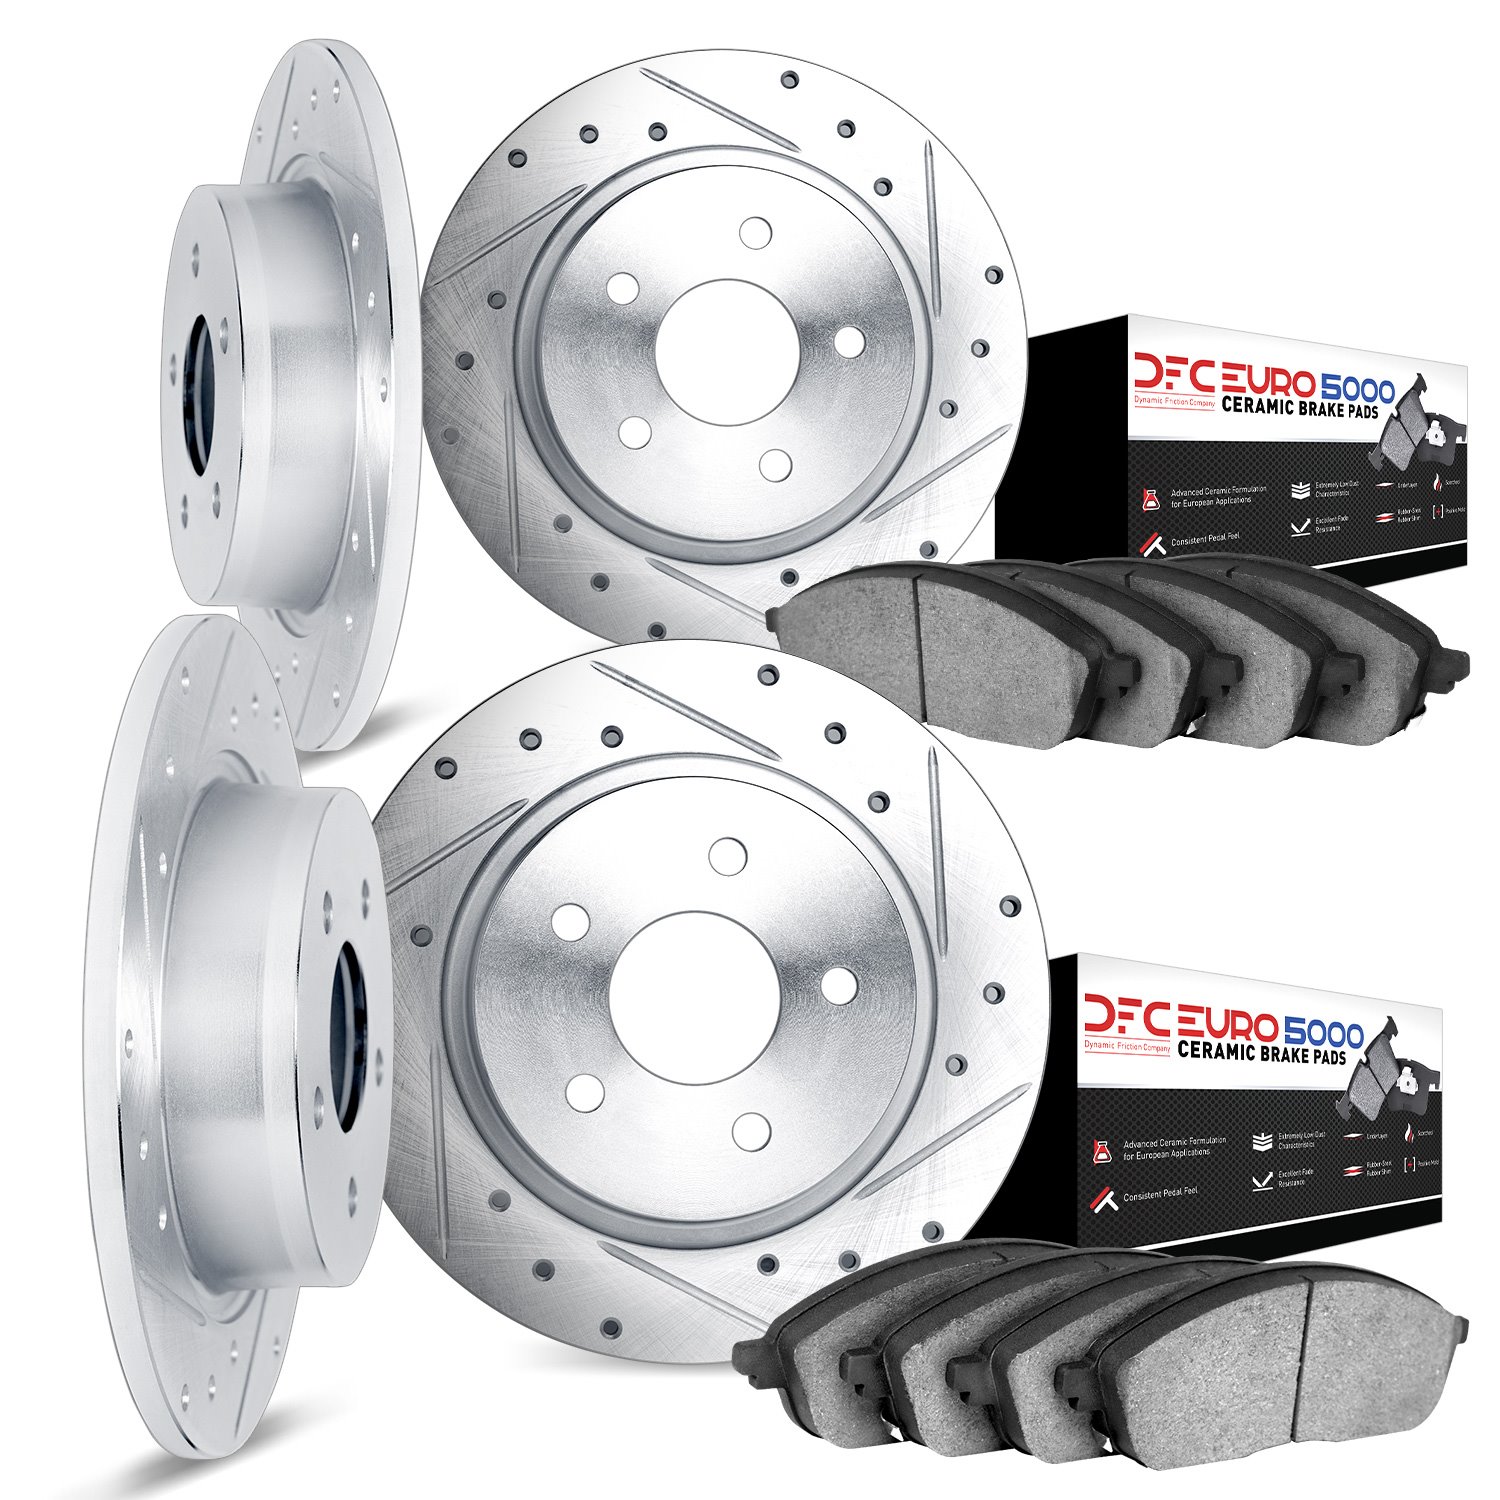 7604-63007 Drilled/Slotted Brake Rotors w/5000 Euro Ceramic Brake Pads Kit [Silver], 1973-1979 Mercedes-Benz, Position: Front an